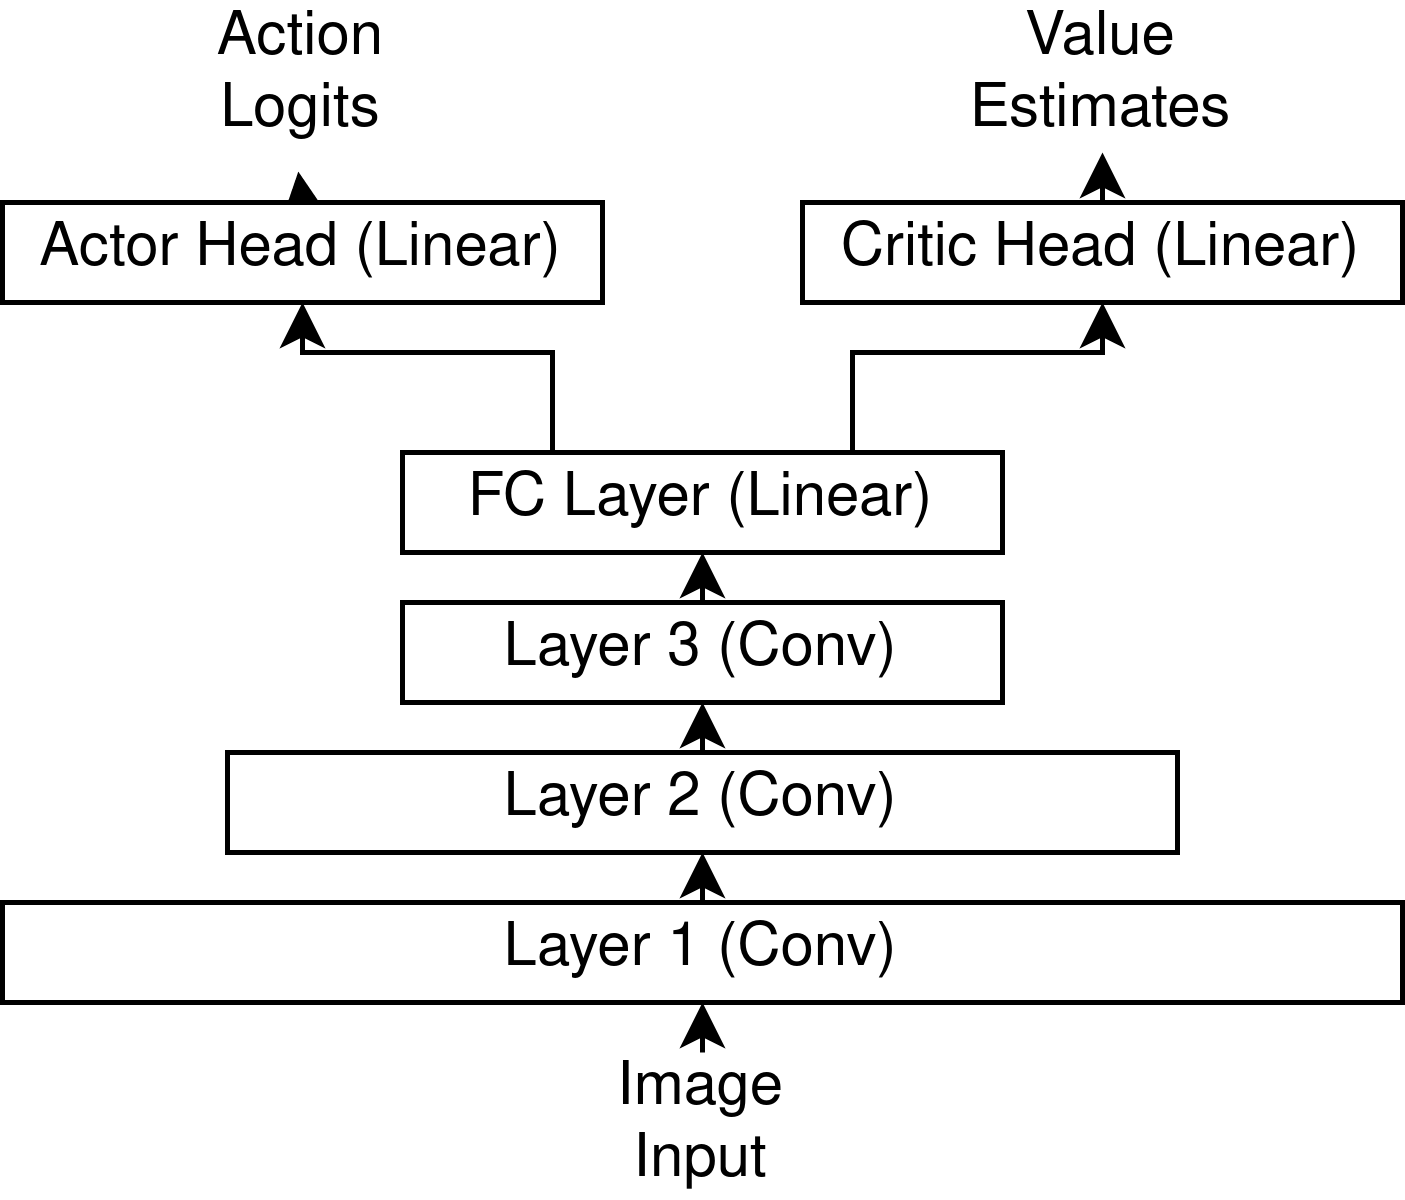 Simplified NN diagram, 3 convolutional layers feed into value and critic heads. There are ReLU non-linearities between each layer. See the notebook for full implementation details.